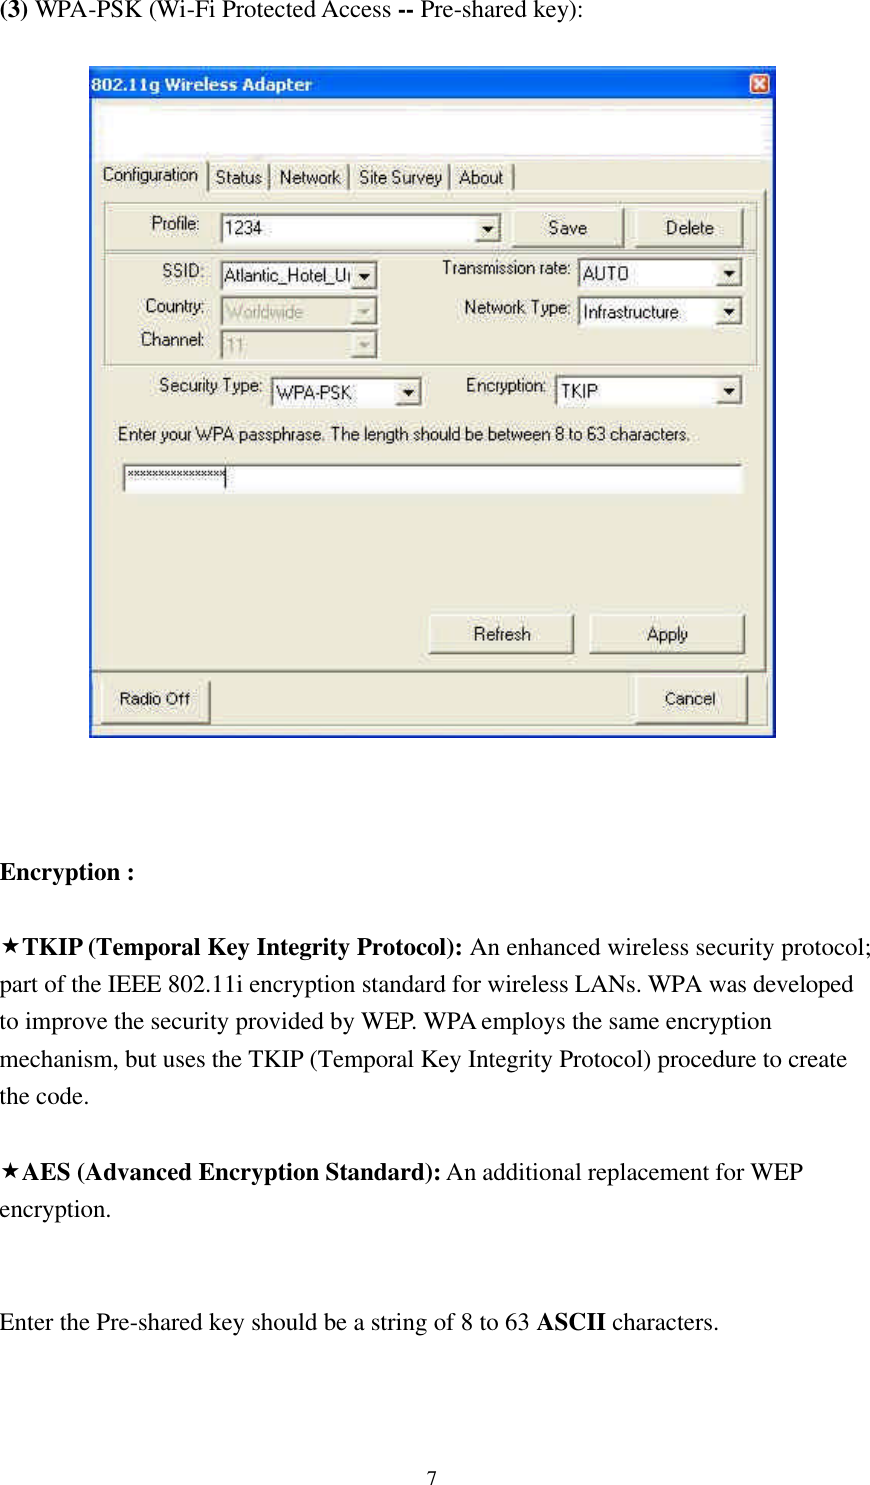 7 (3) WPA-PSK (Wi-Fi Protected Access -- Pre-shared key):      Encryption :  «TKIP (Temporal Key Integrity Protocol): An enhanced wireless security protocol; part of the IEEE 802.11i encryption standard for wireless LANs. WPA was developed to improve the security provided by WEP. WPA employs the same encryption mechanism, but uses the TKIP (Temporal Key Integrity Protocol) procedure to create the code.  «AES (Advanced Encryption Standard): An additional replacement for WEP encryption.   Enter the Pre-shared key should be a string of 8 to 63 ASCII characters.   